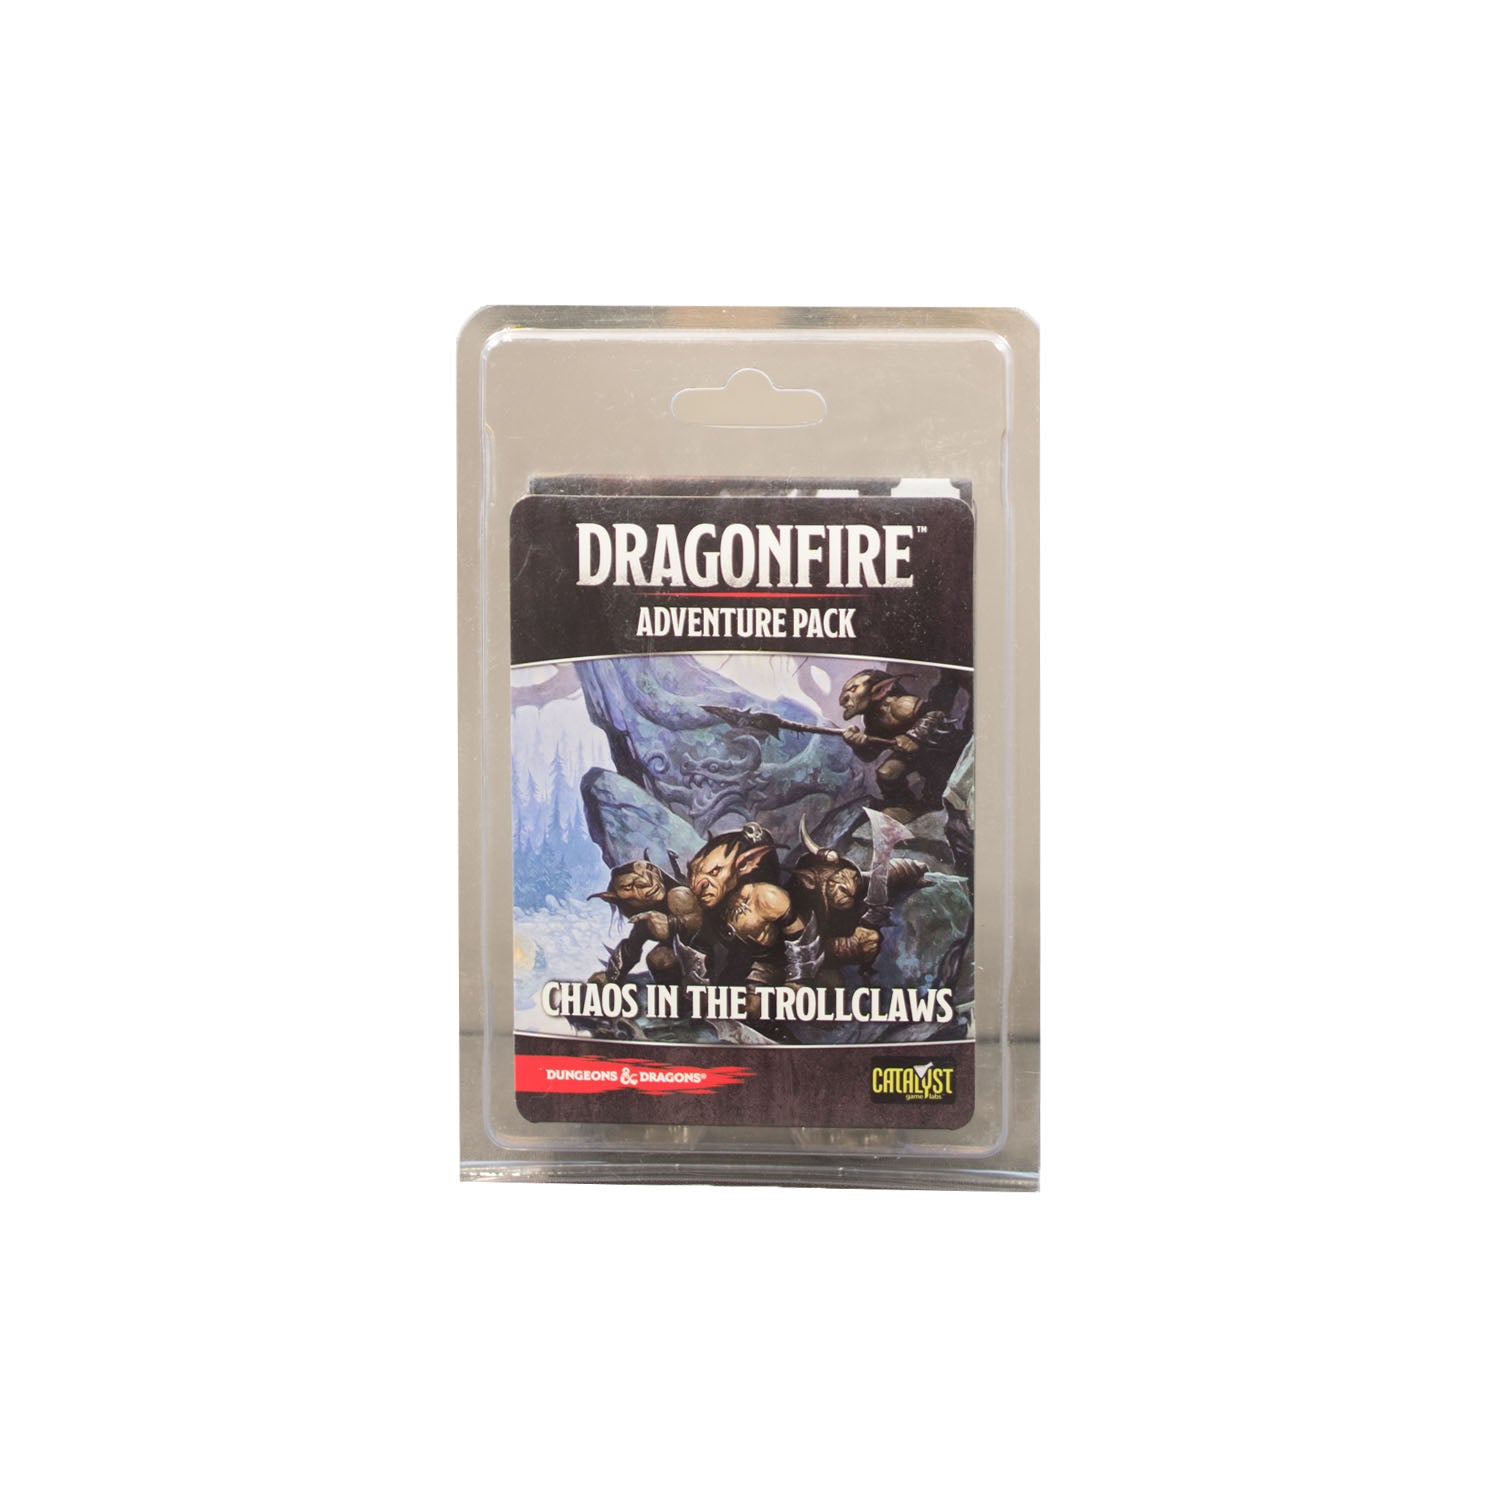 Dragonfire: Adventures - Chaos in the Trollclaws